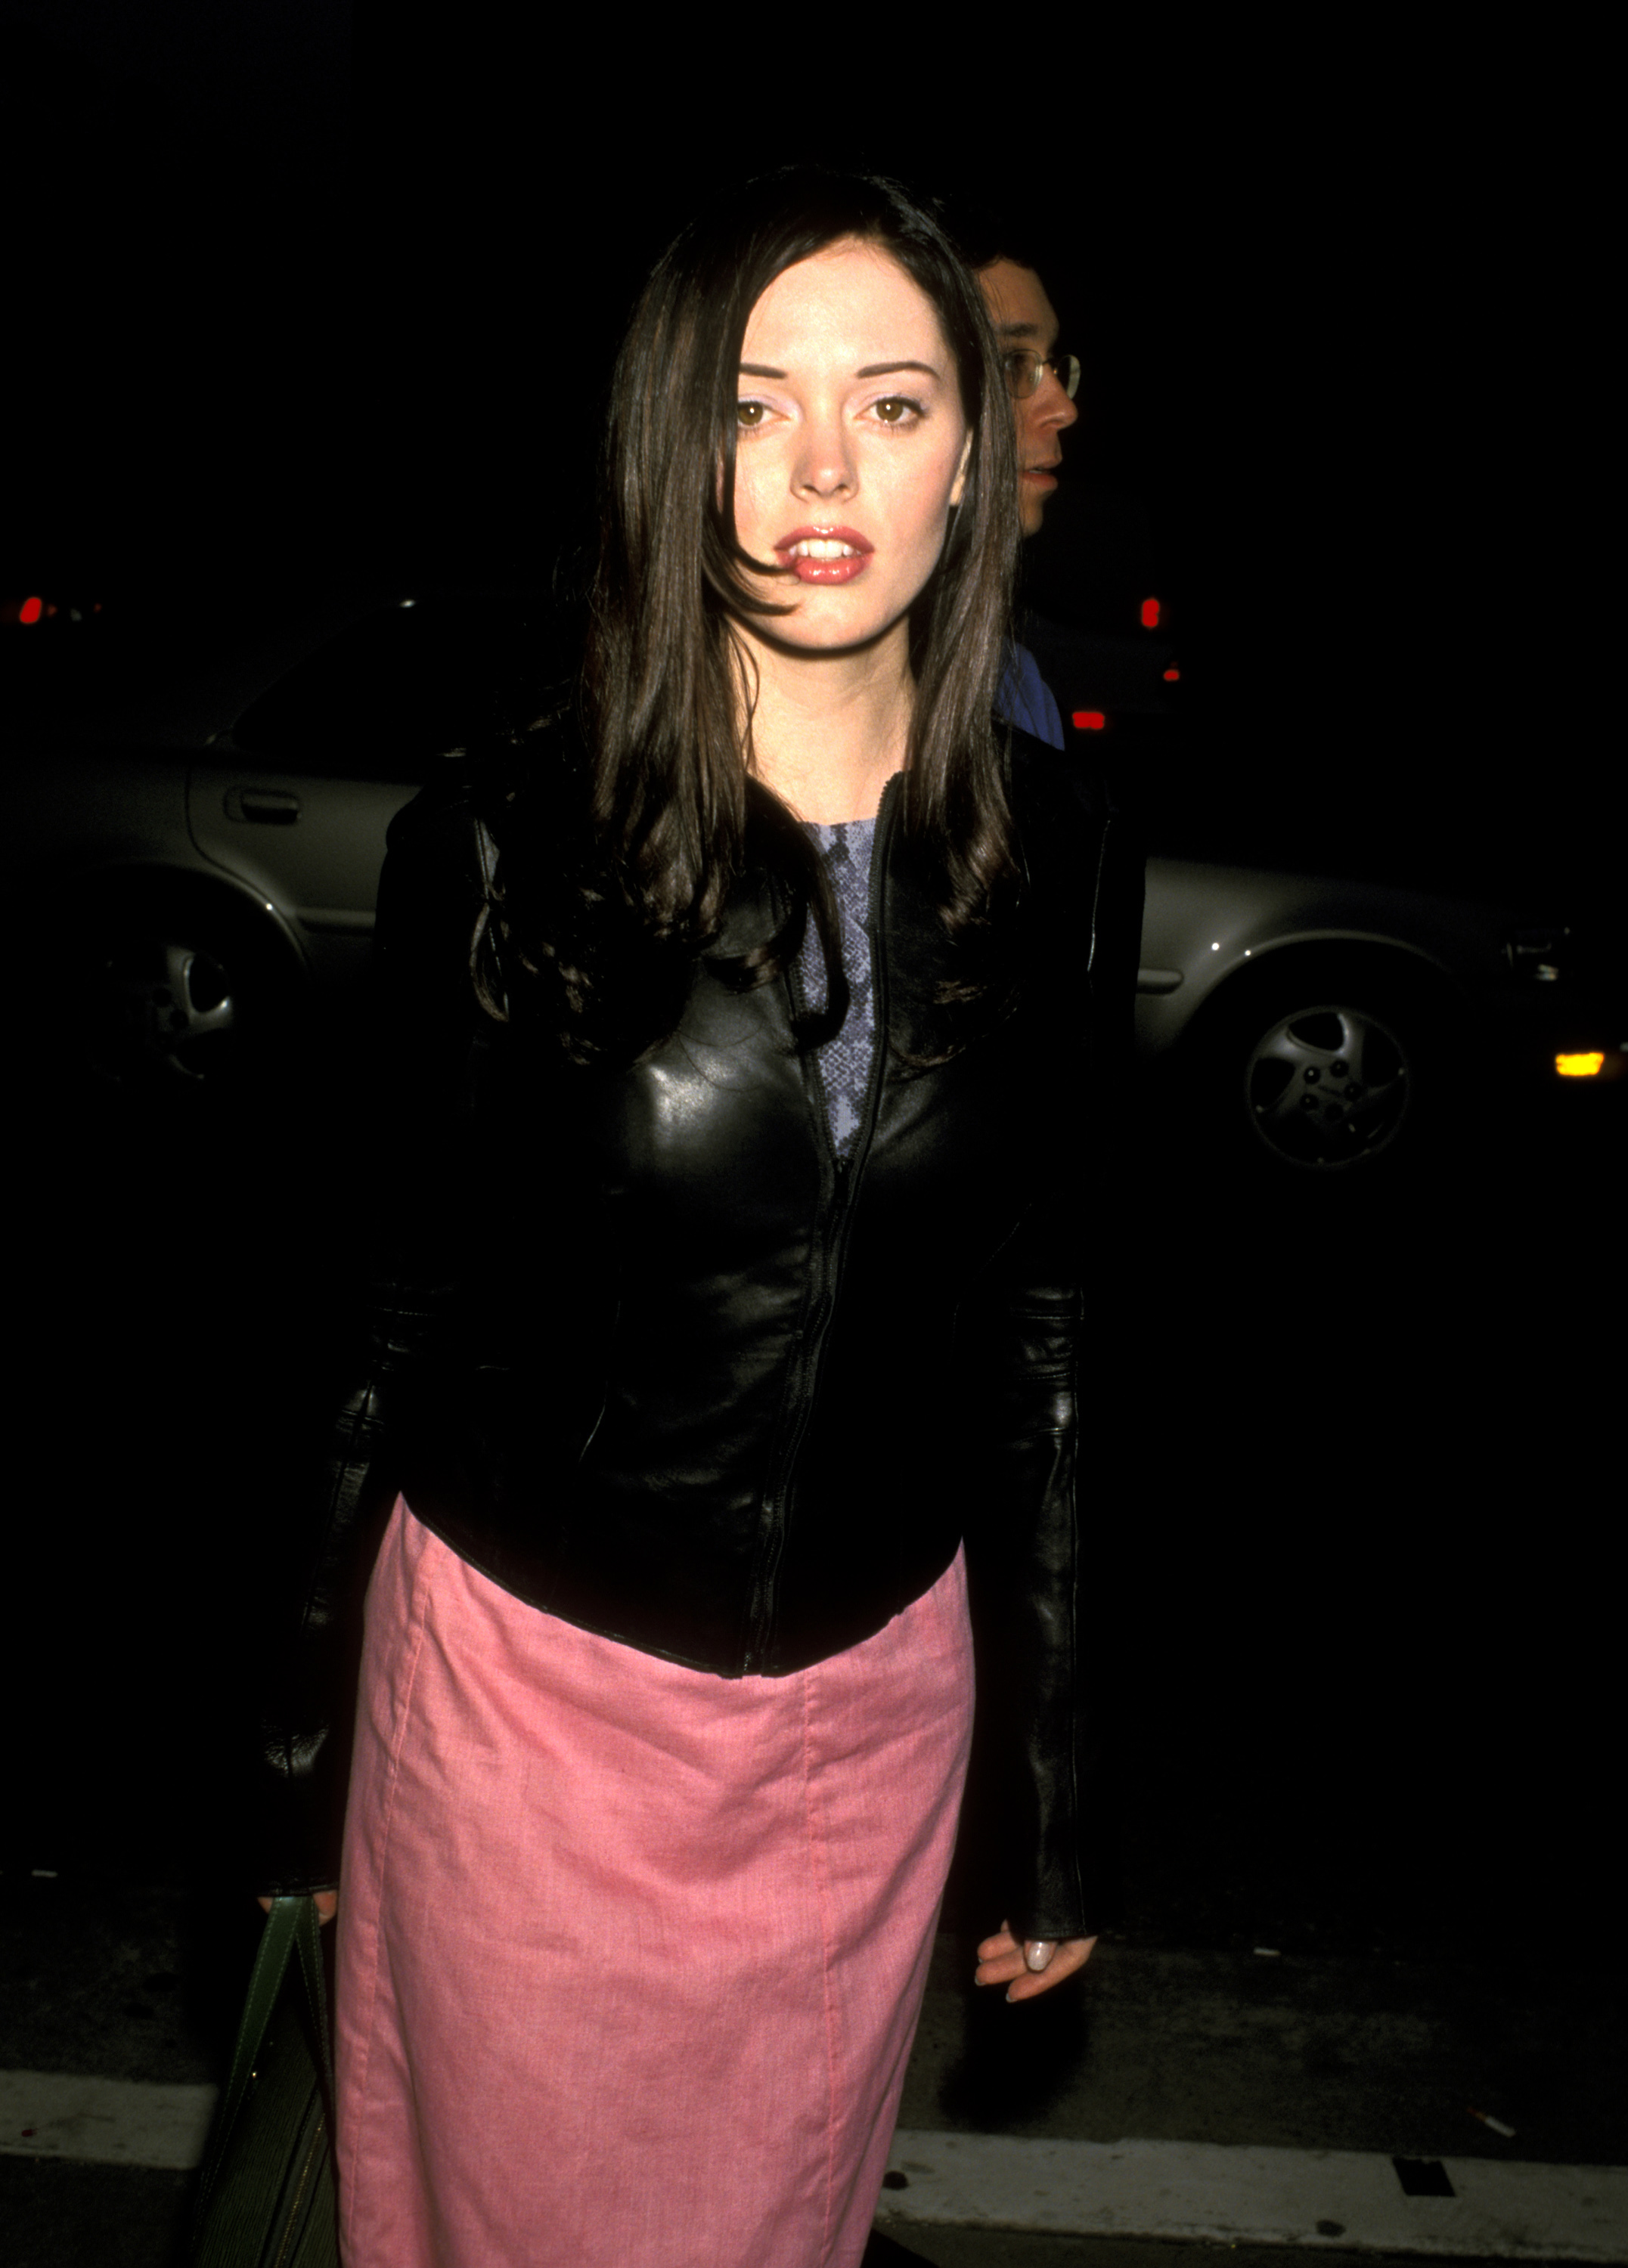 Rose McGowan during the Mascara Premiere at Laemmle Theatres Music Hall on May 12, 1999, in Beverly Hills, California. | Source: Getty Images